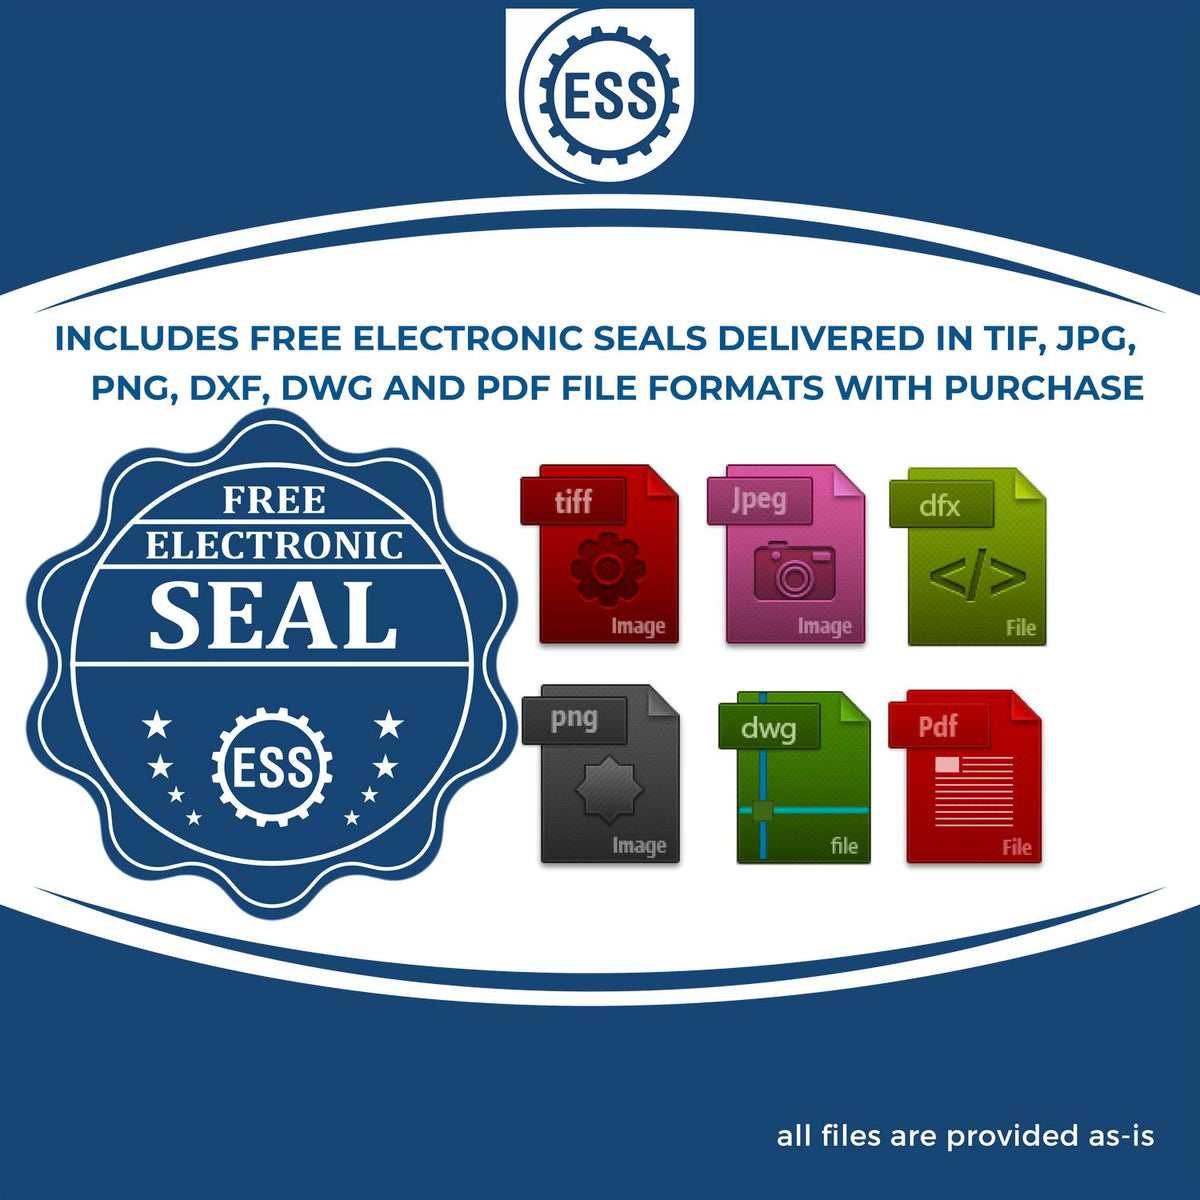 An infographic for the free electronic seal for the Hybrid South Carolina Geologist Seal illustrating the different file type icons such as DXF, DWG, TIF, JPG and PNG.